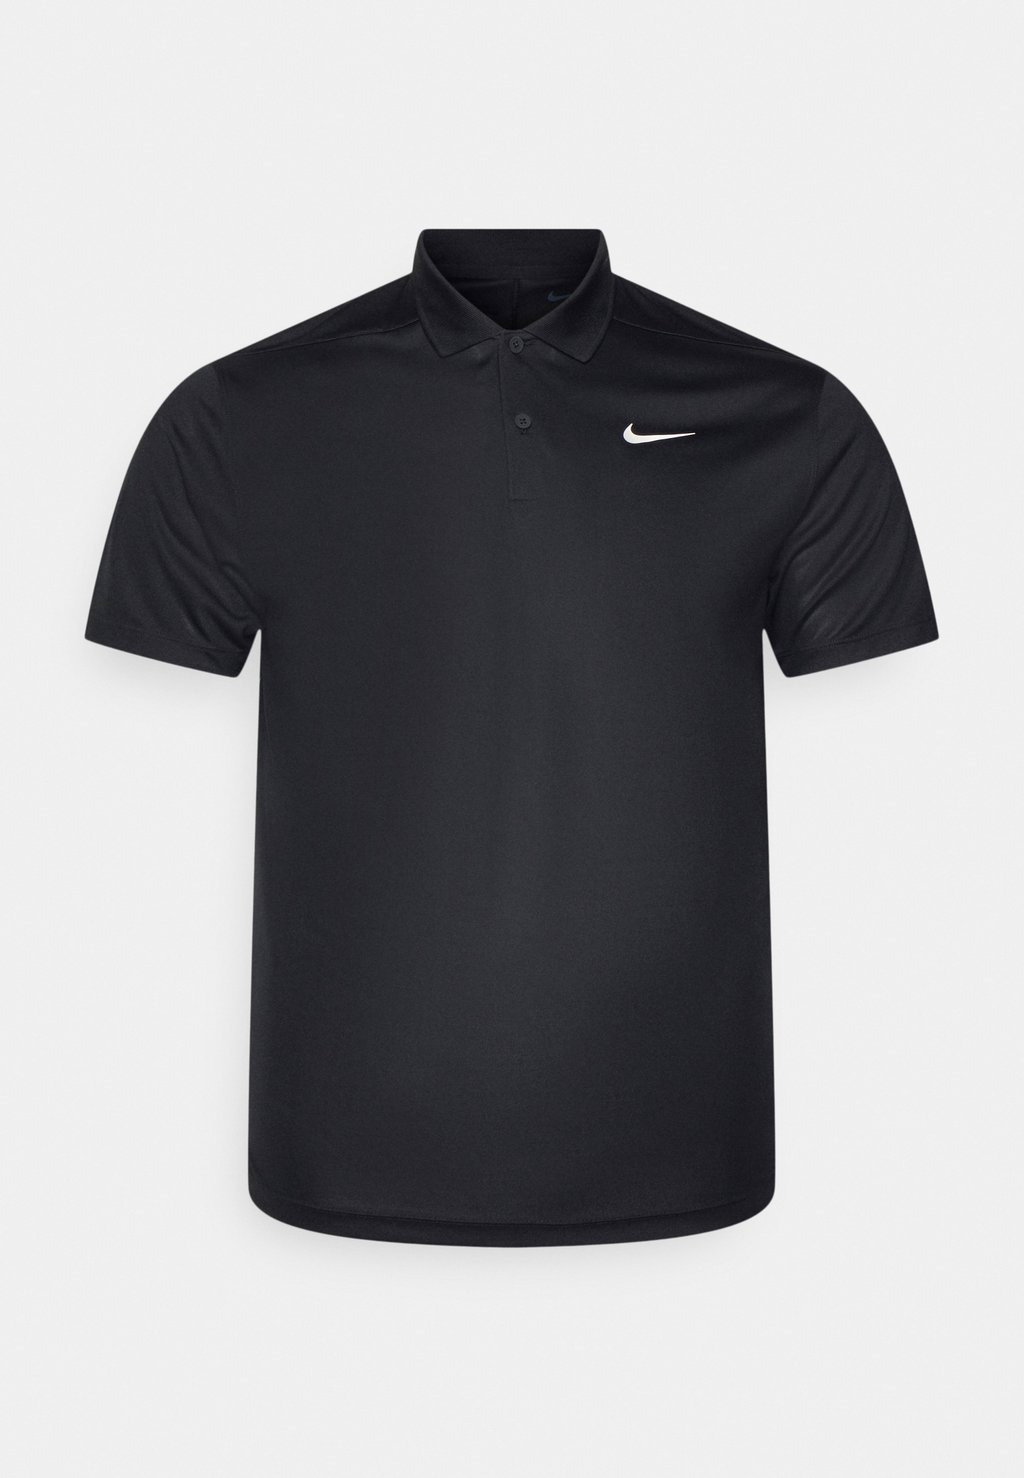 Поло M NK DF VCTRY SOLID POLO Nike, черный поло m nk df tour polo solid nike черный белый